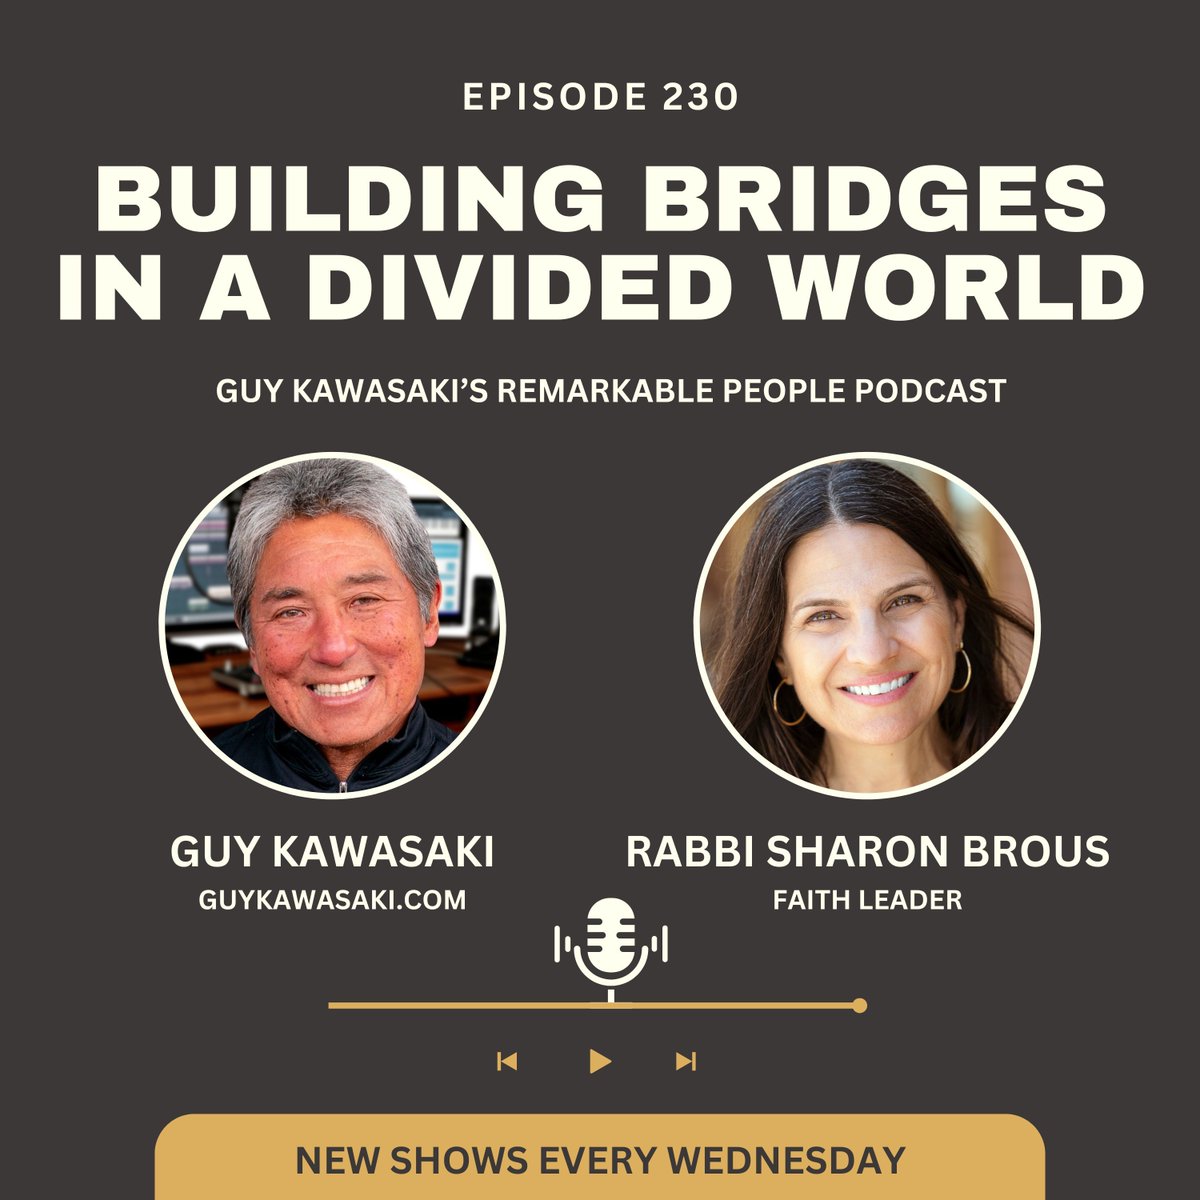 The pioneering Rabbi Sharon Brous shares wisdom on envisioning peace, even in times of division. ☮️🕊️ Don't miss this inspiring episode! Tune in now: bit.ly/49Qctxh